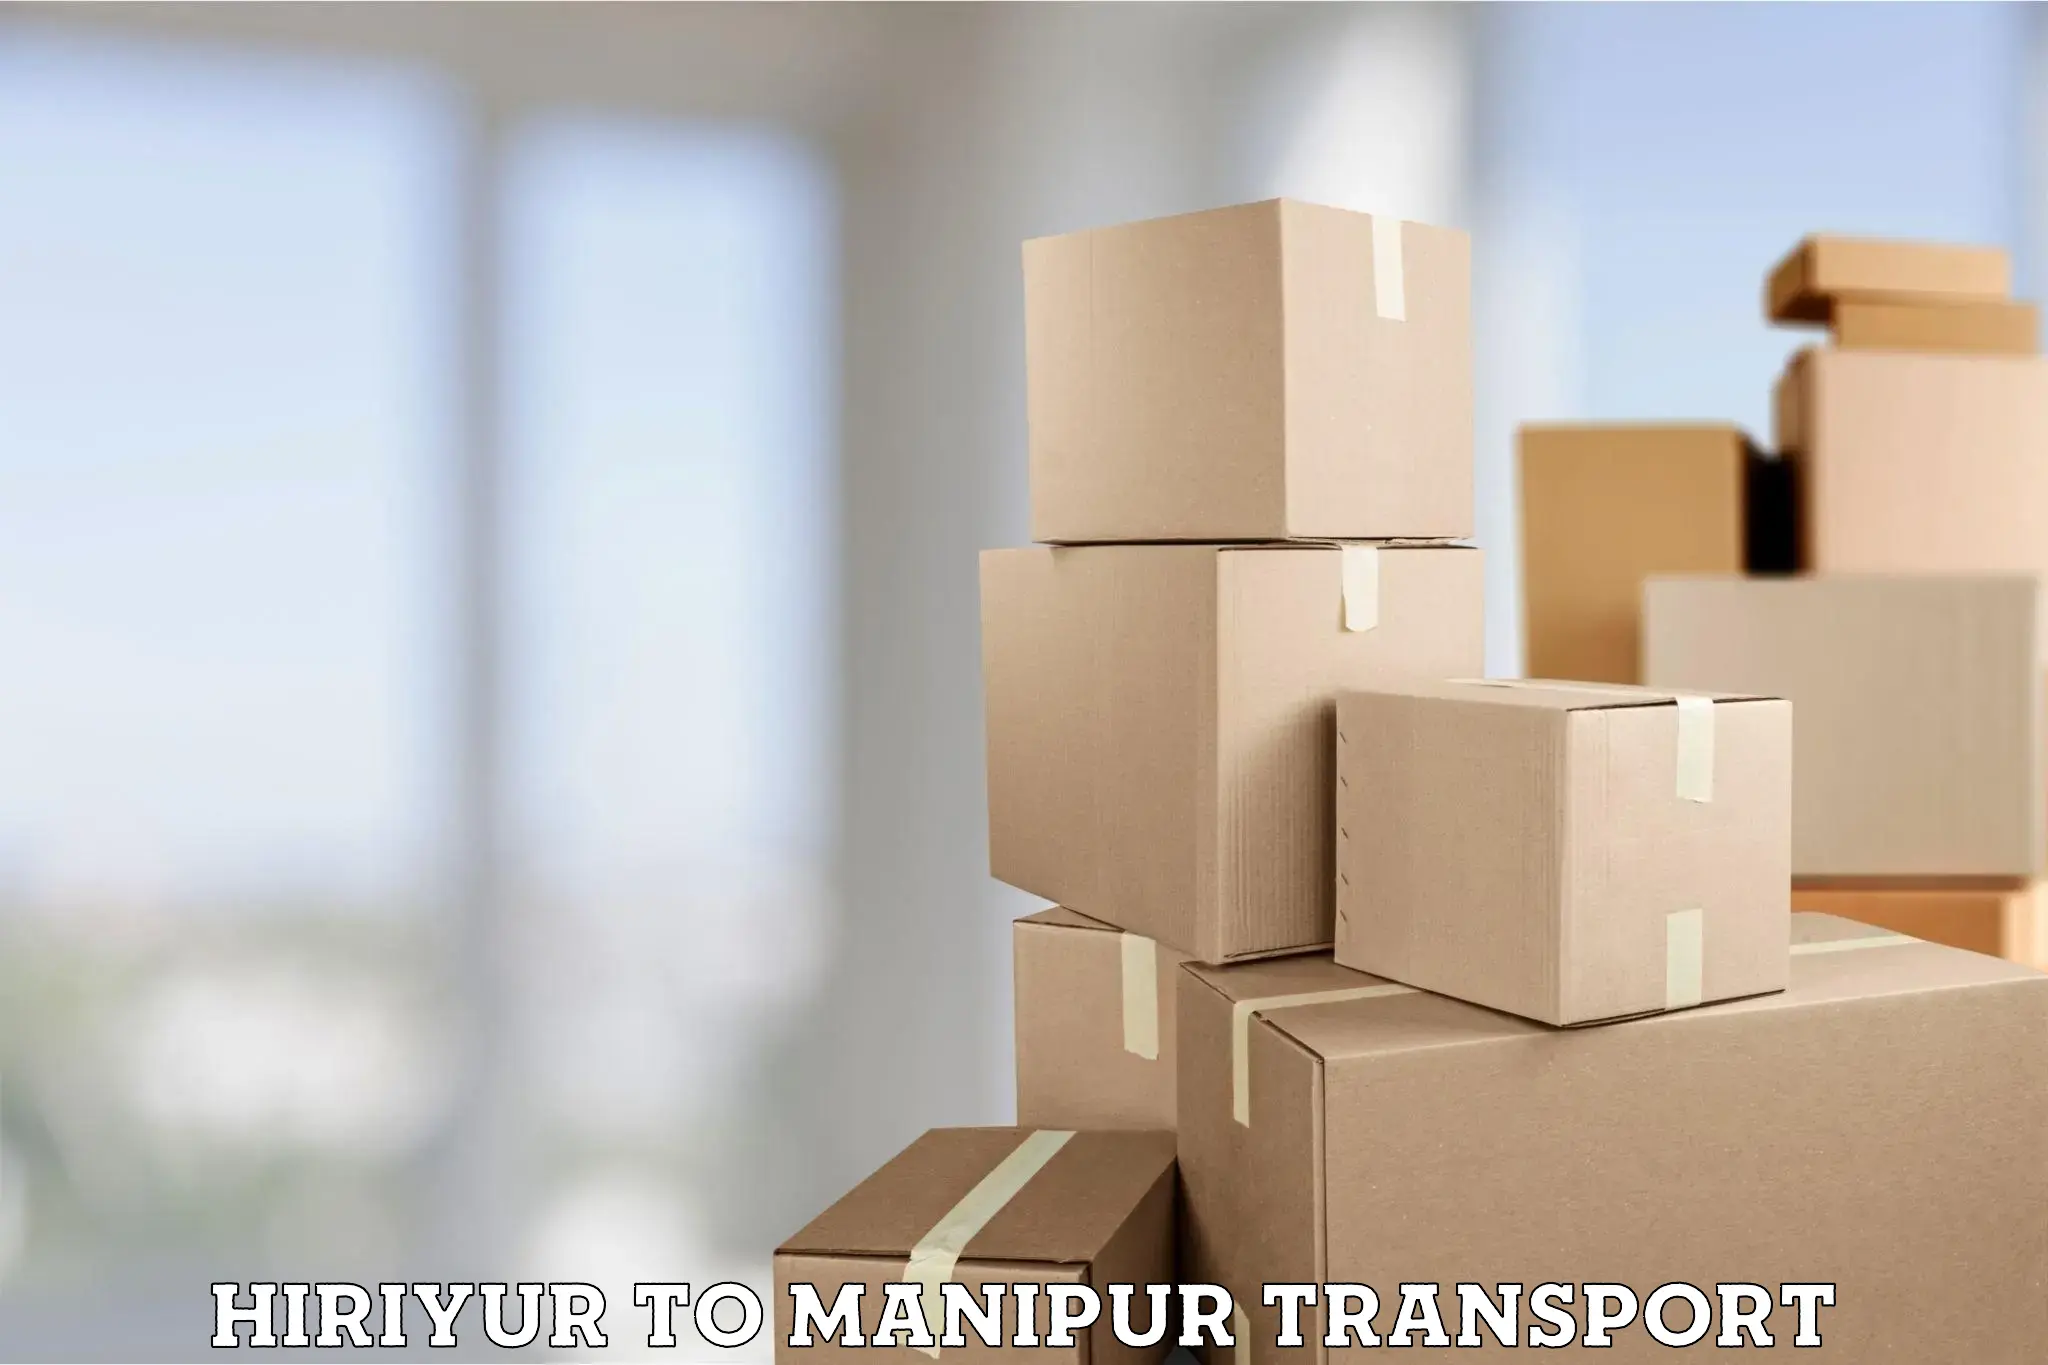 Container transport service Hiriyur to Manipur